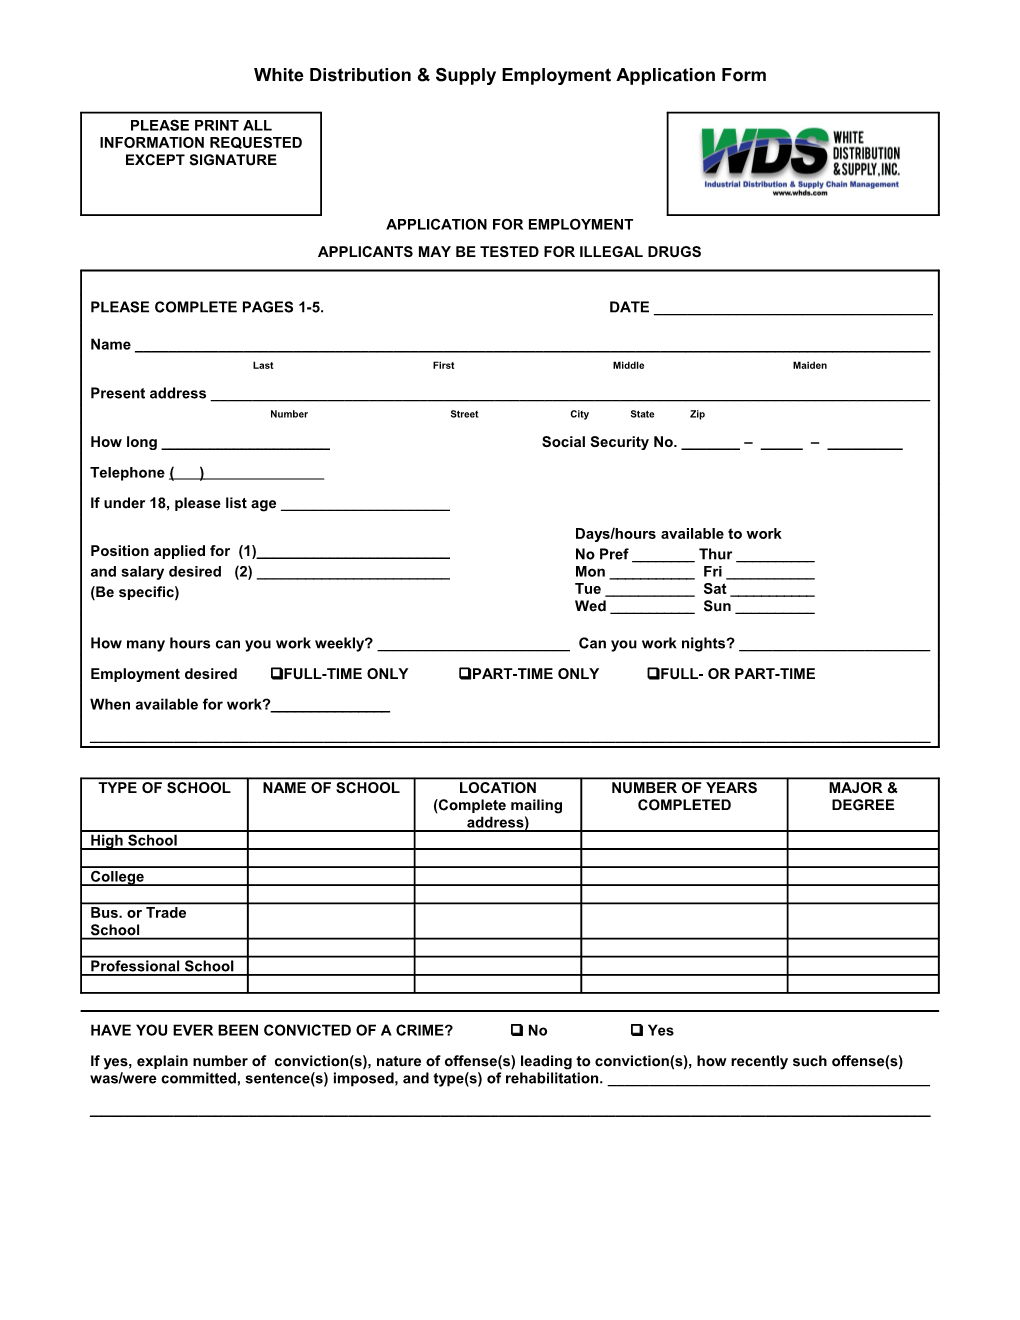 Sample Employment Application Form s5